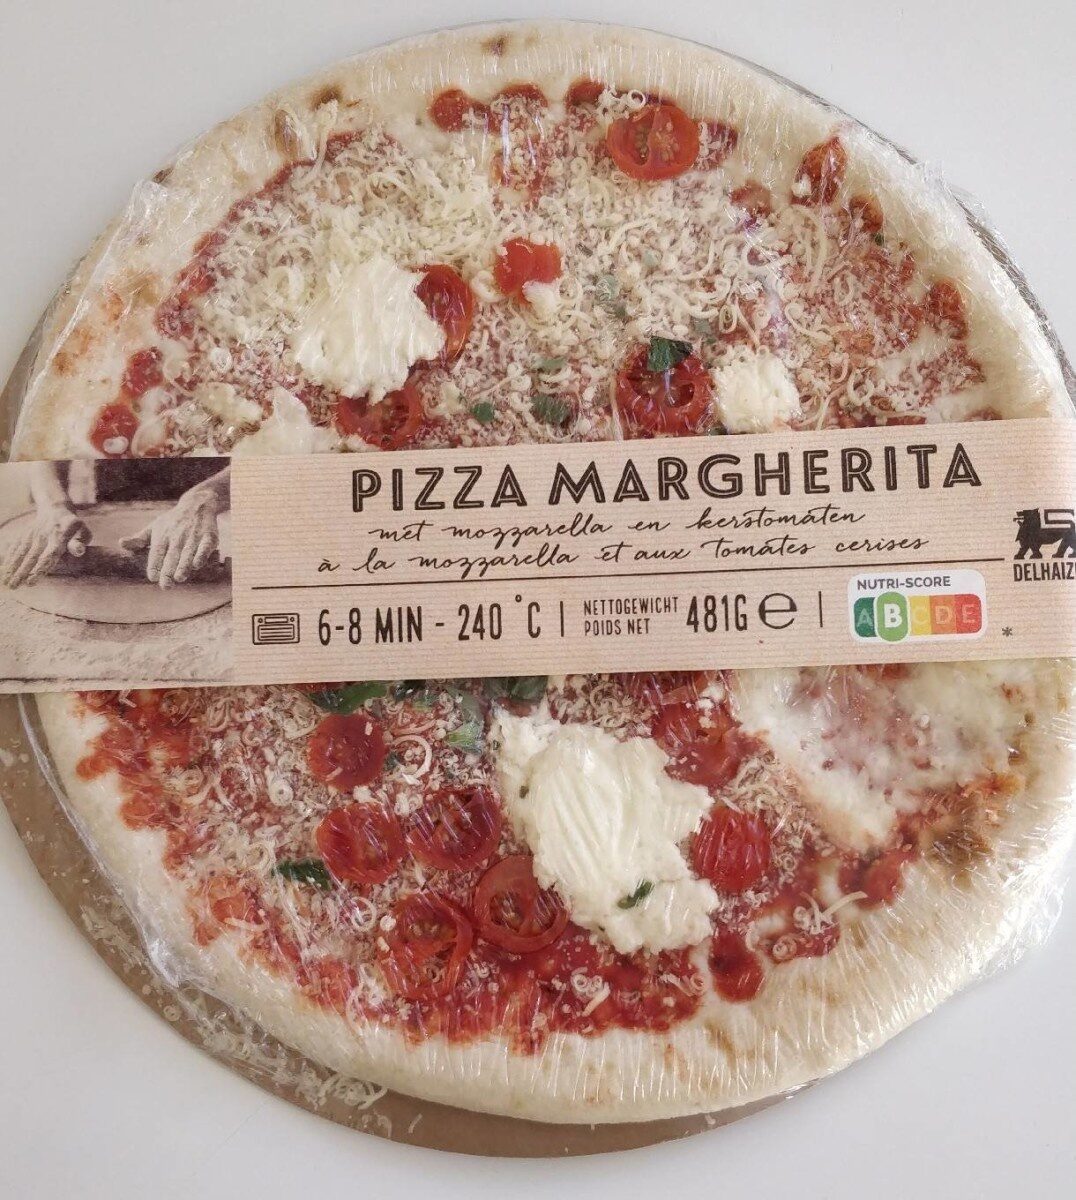 Pizza Margherita - Product - fr